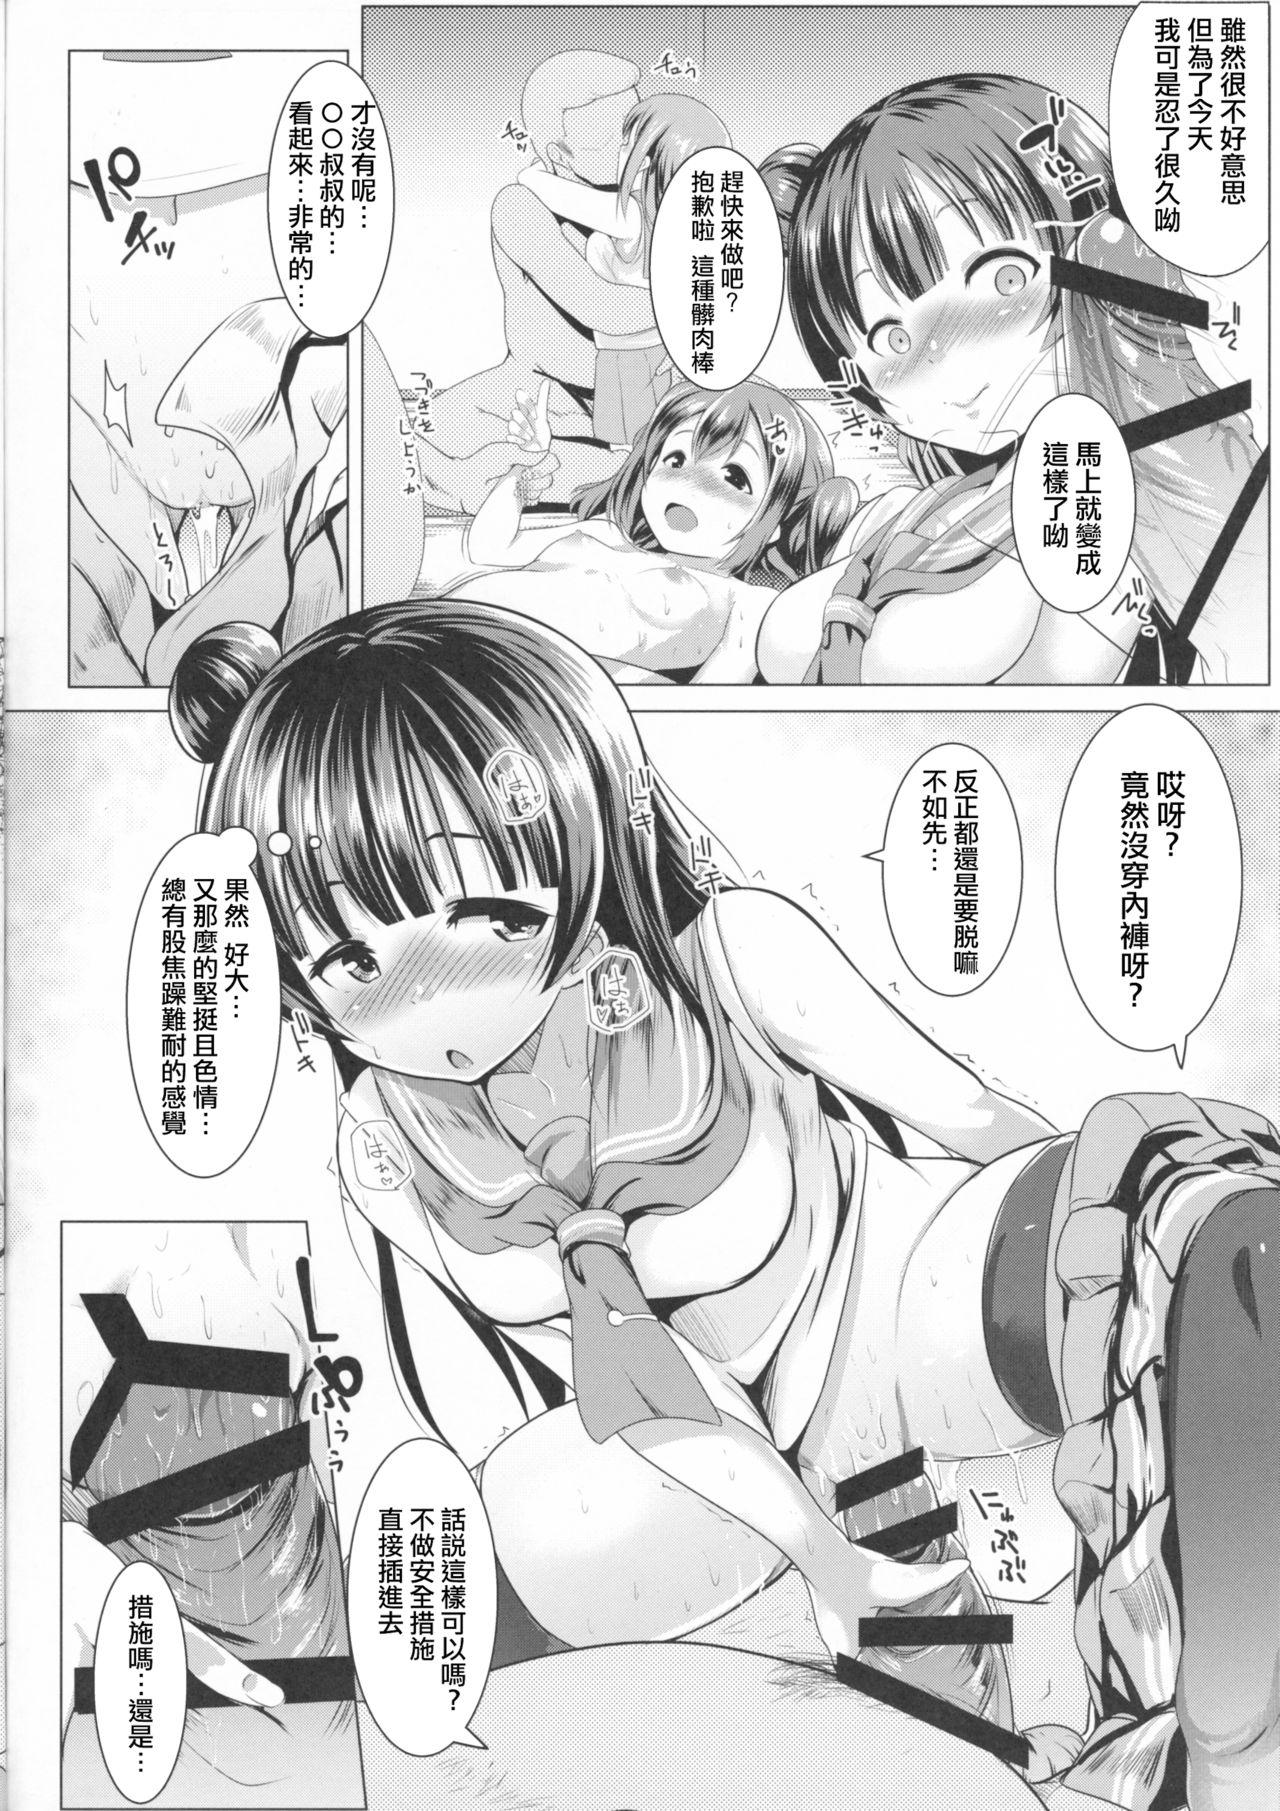 Maid SUMMER PROMISCUITY with Yoshimaruby - Love live sunshine Gay Pornstar - Page 7